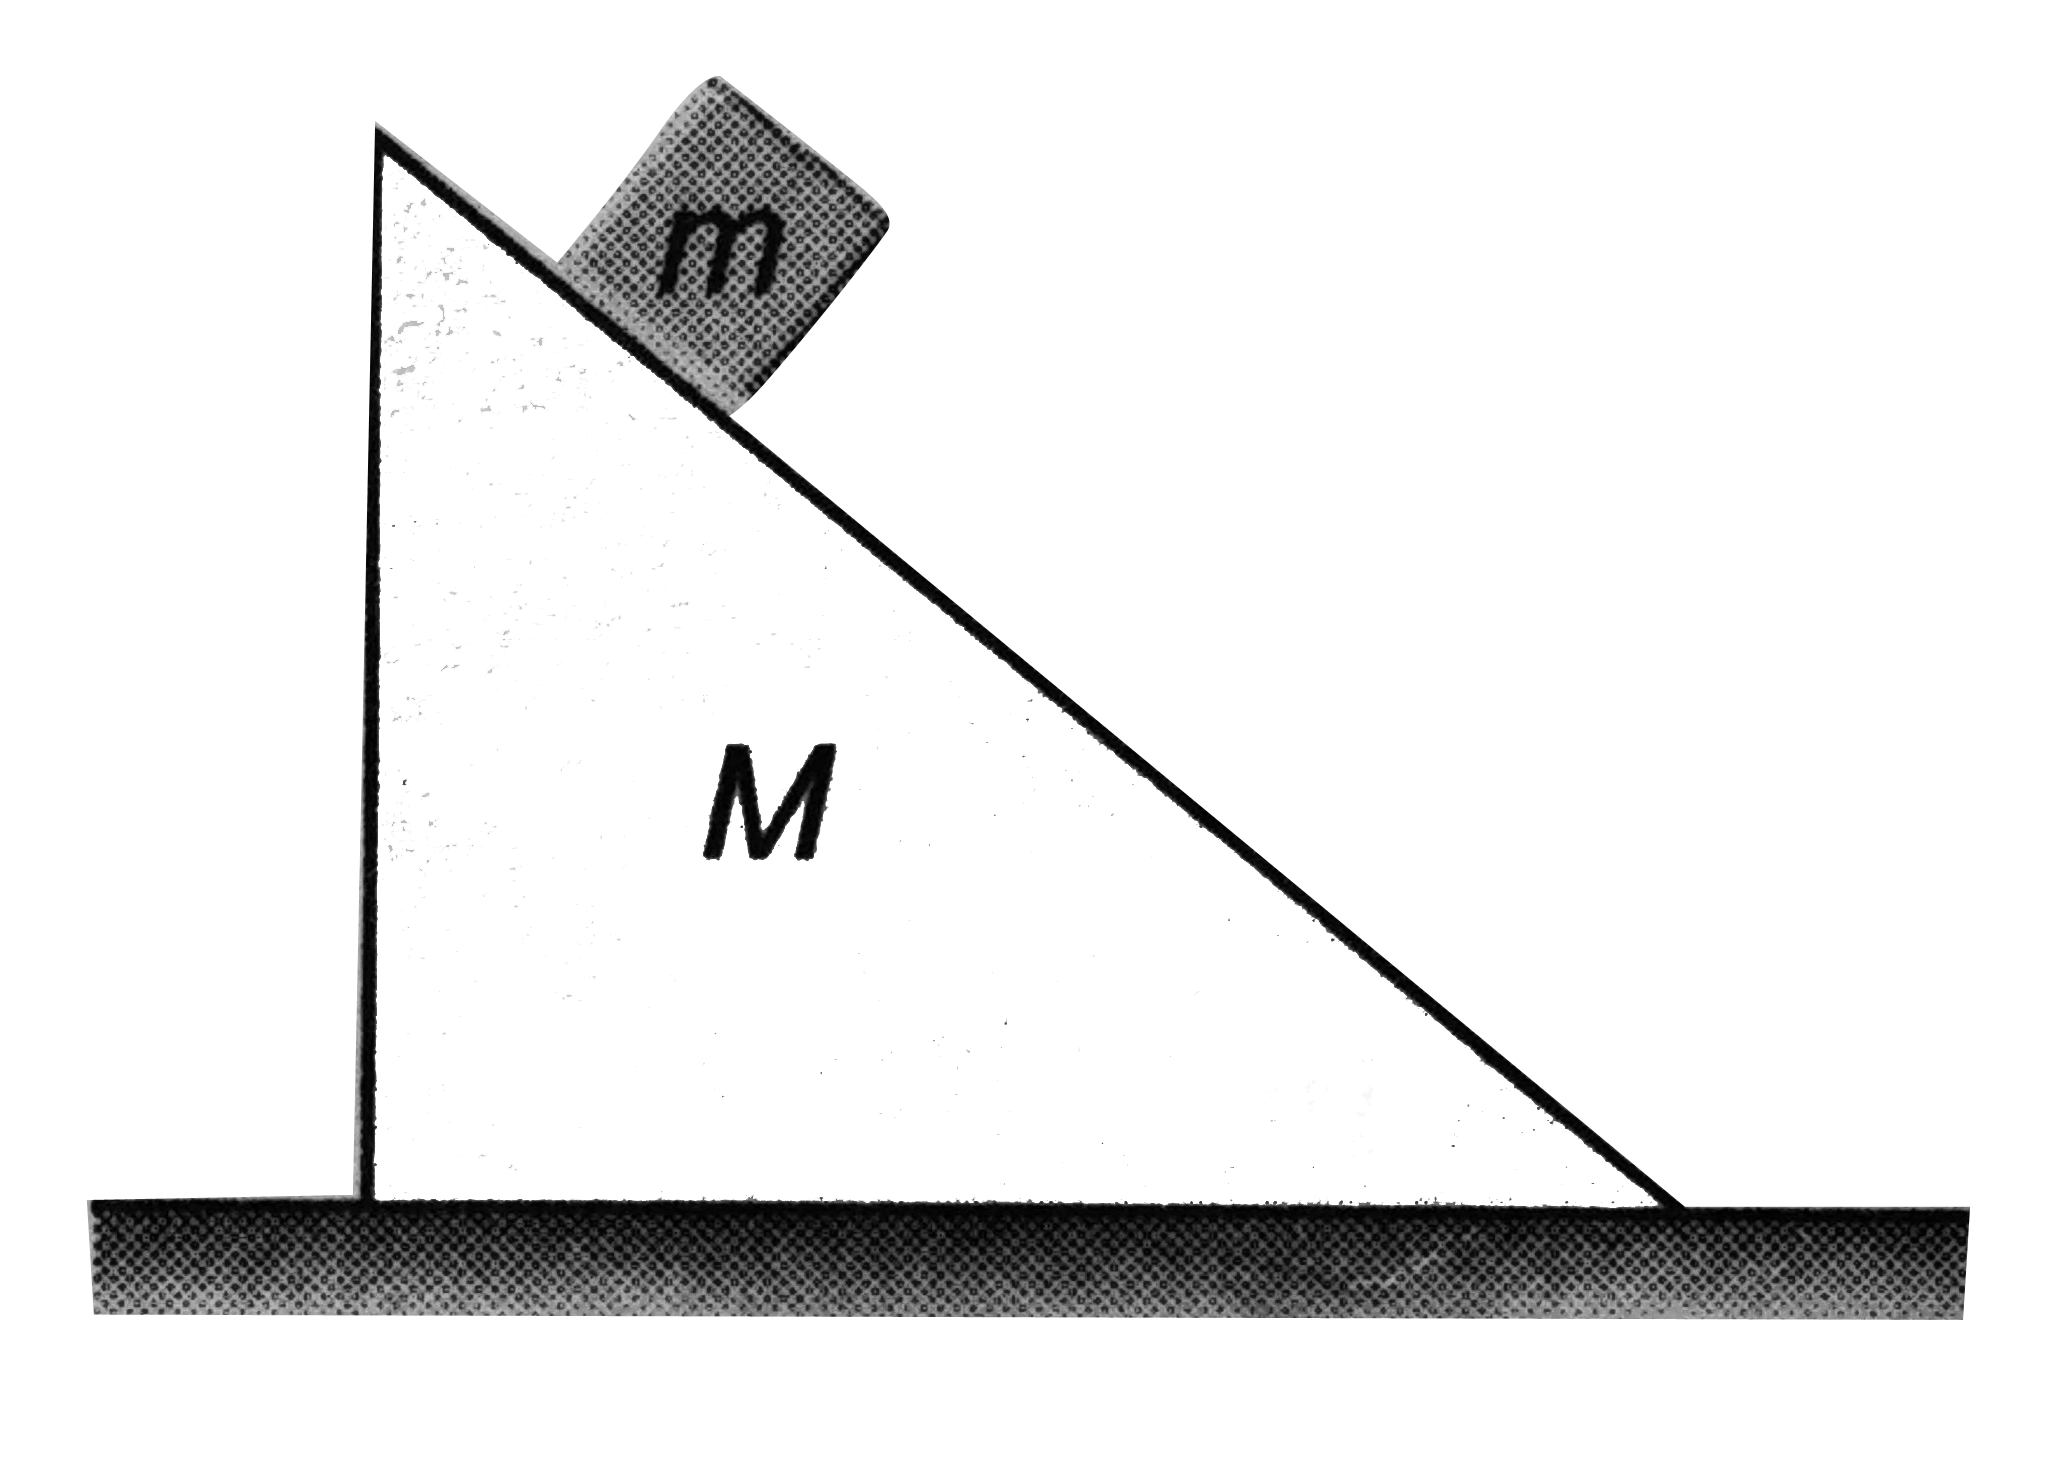 A block of mass m is placed at rest on a smooth wedge of mass M placed at rest on a smooth horizontal surface. As the system is released